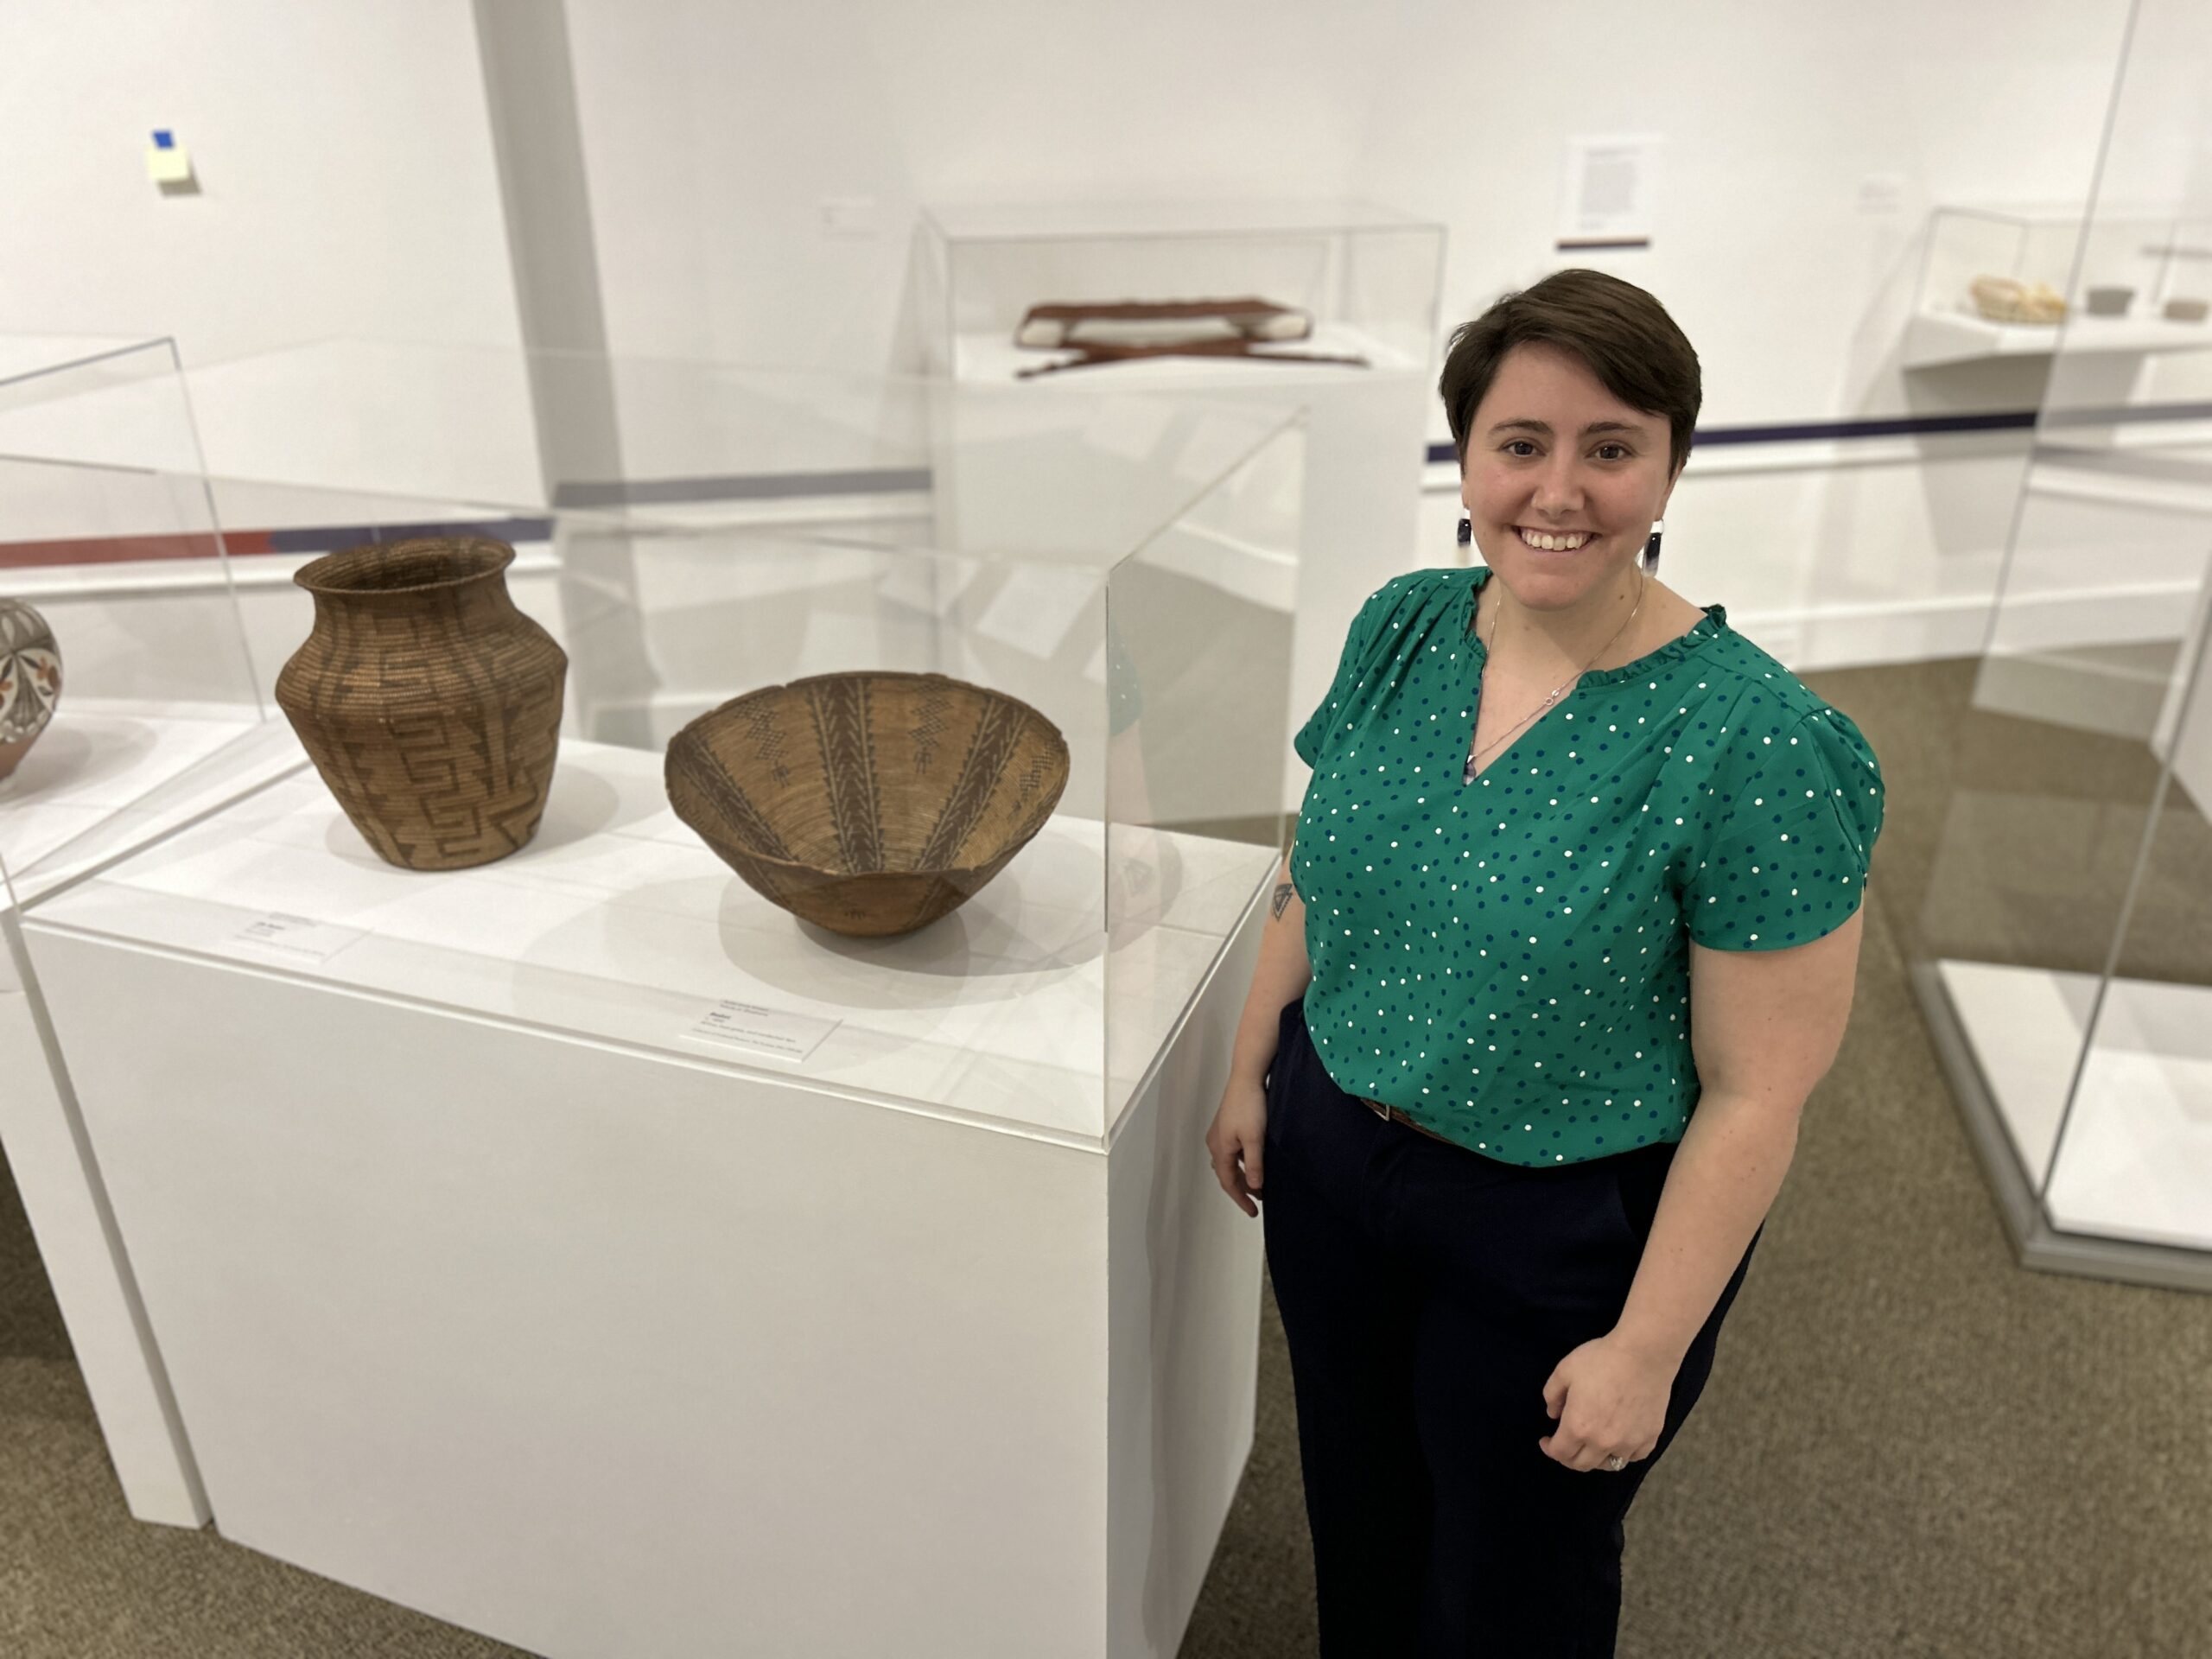 a smiling woman with short hair and a green shirt stands next to native baskets on display